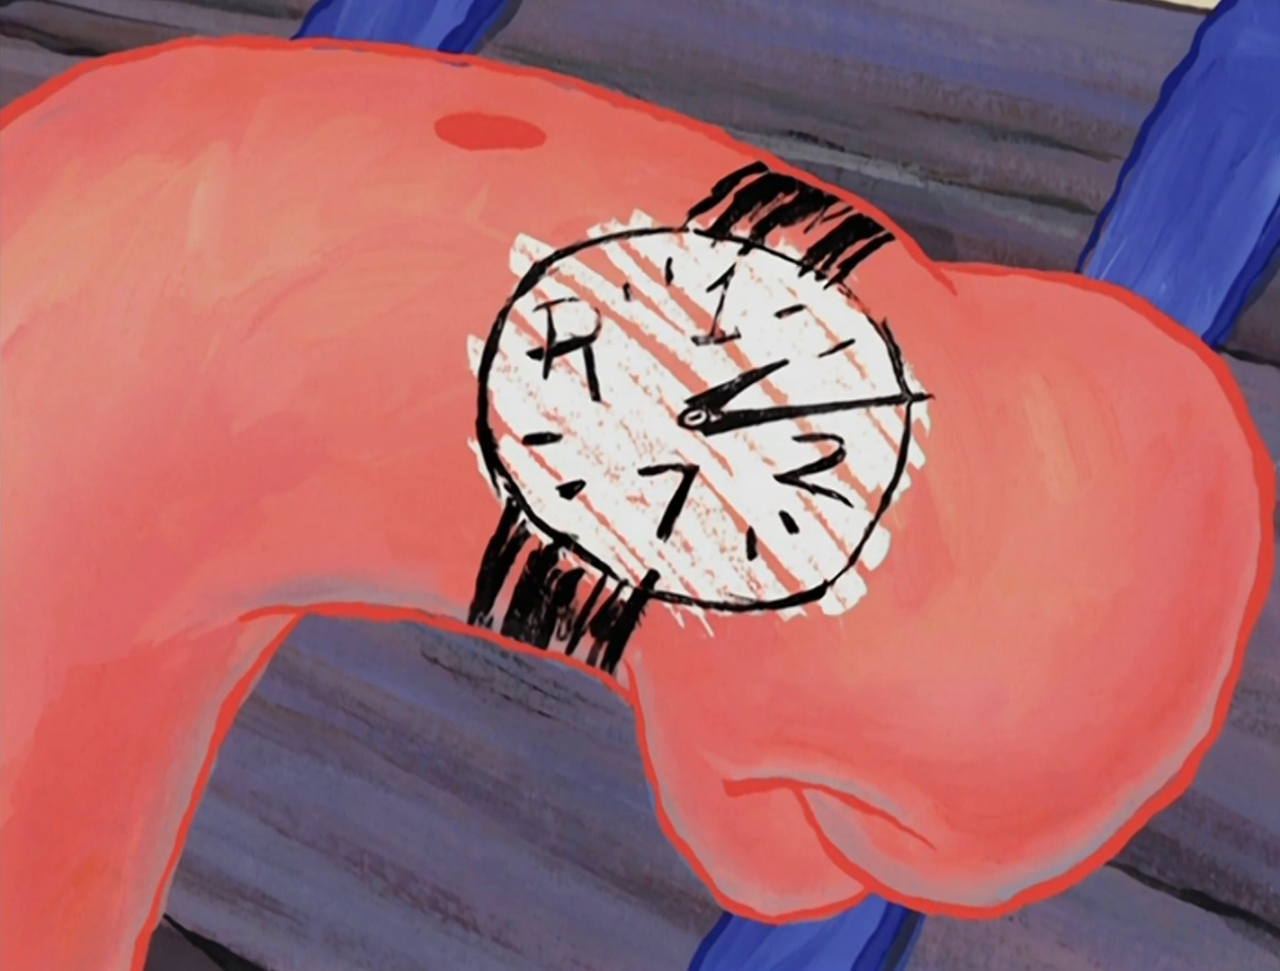 quadricolor-deactivated20211220:Patrick’s watches are by far the funniest thing in the world to me rn 